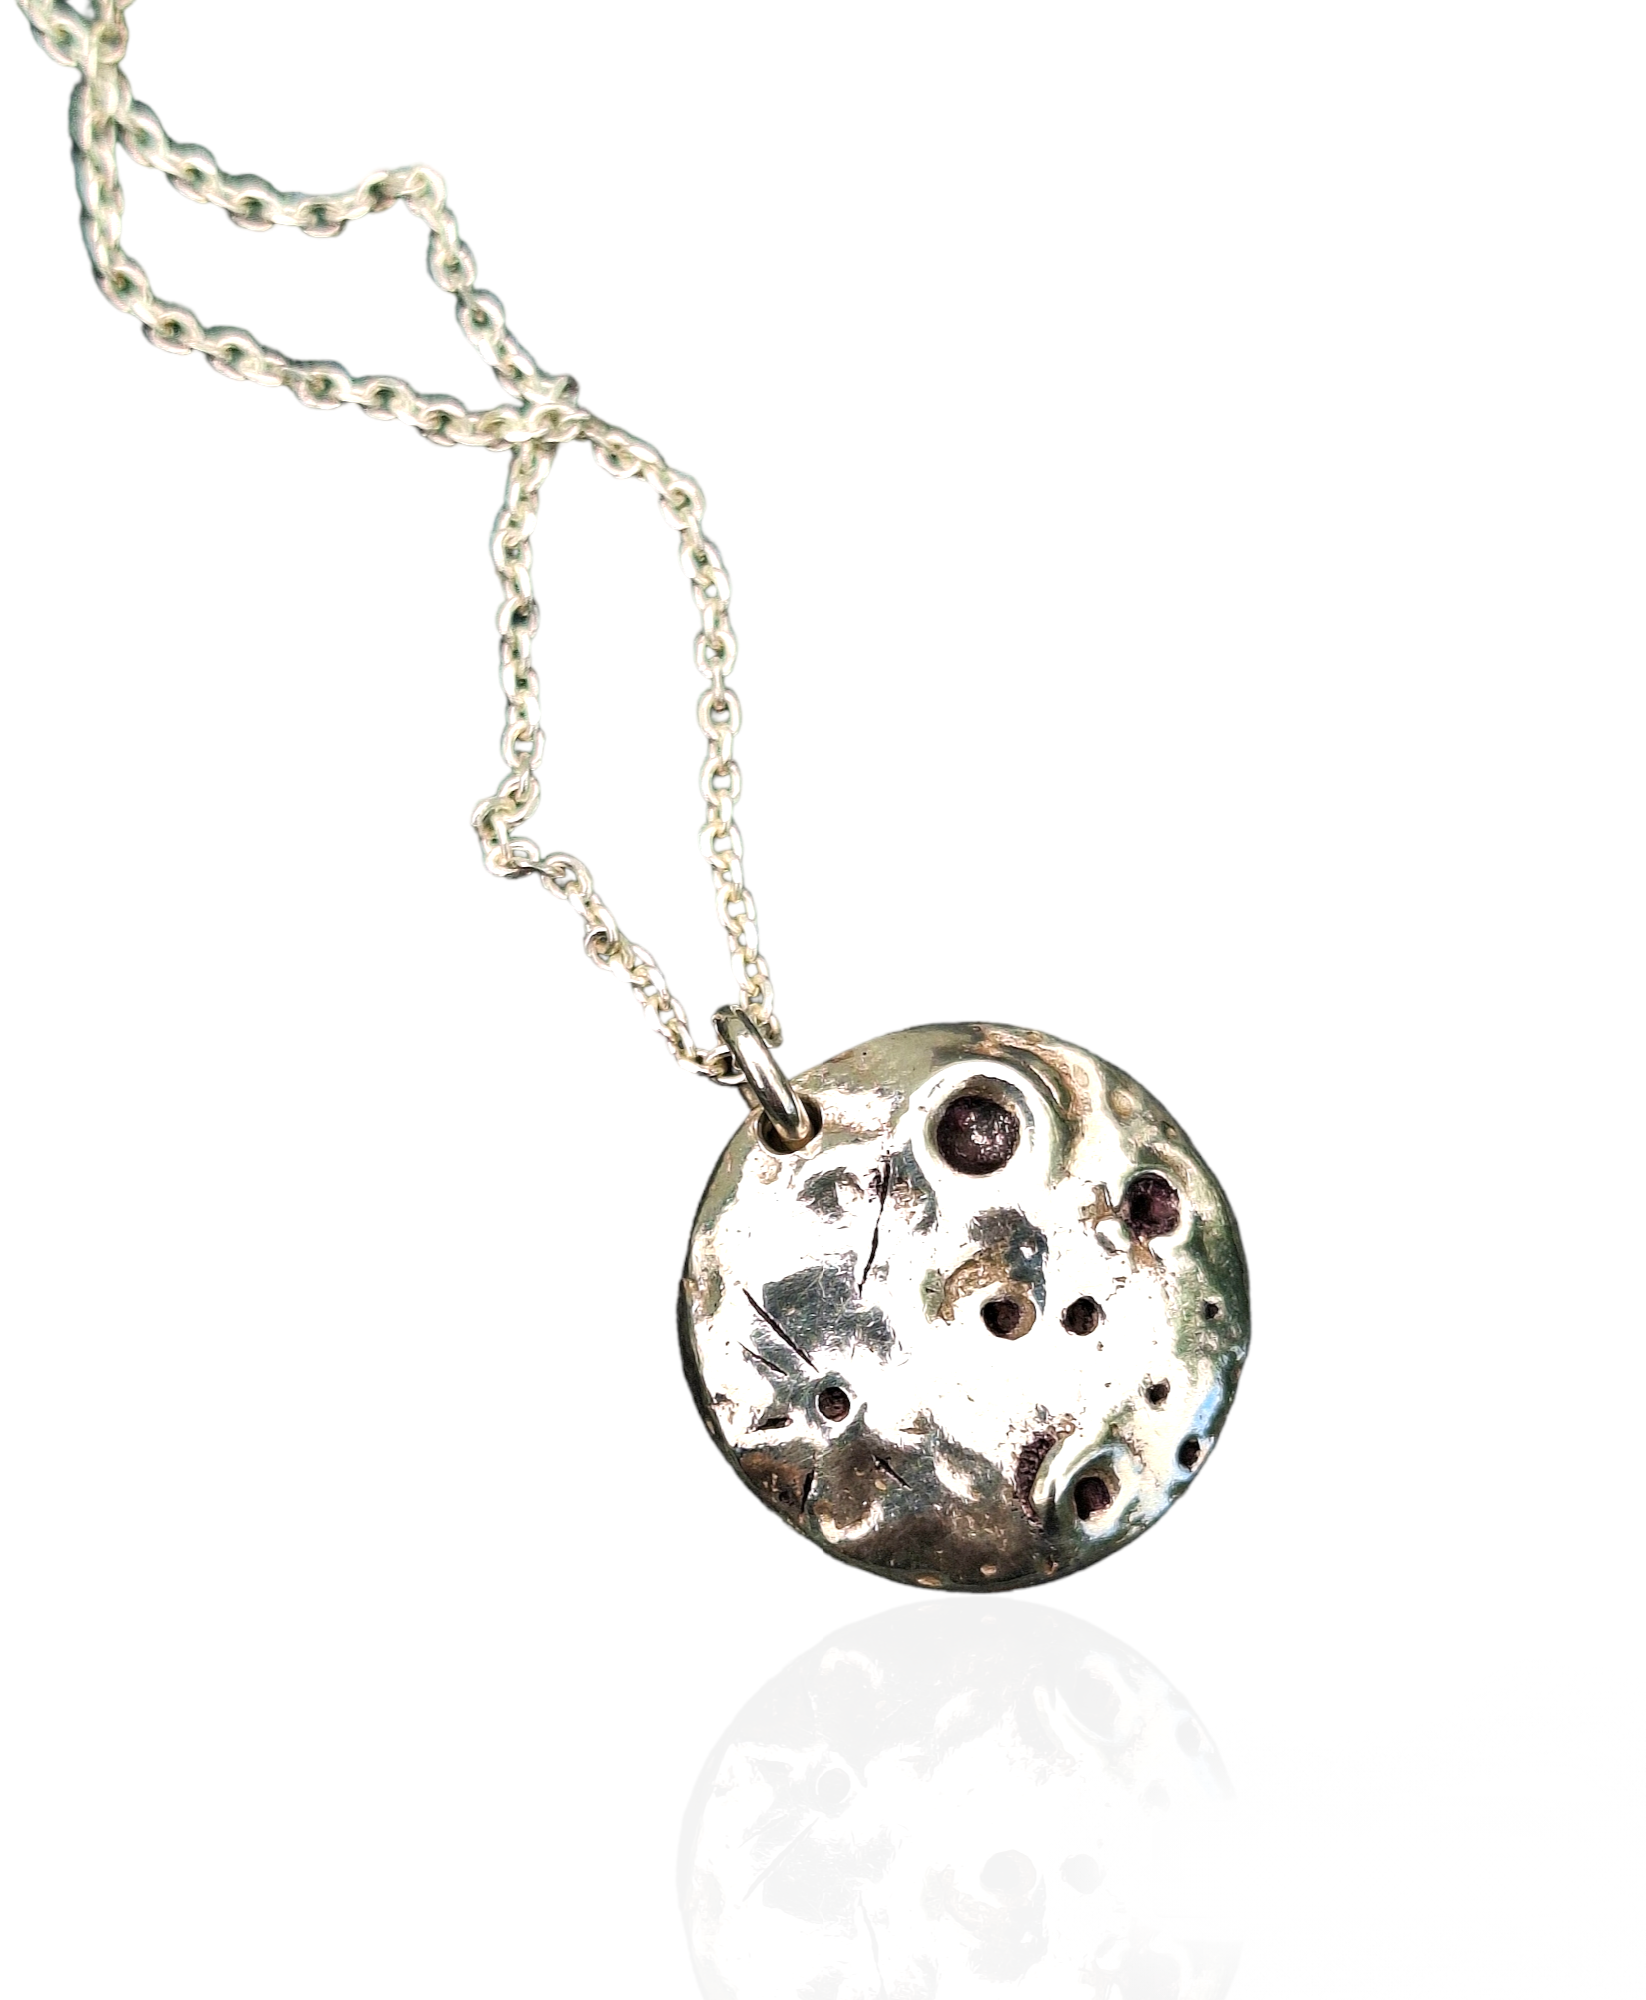 Molten Moon - Sterling Silver Moon Necklace